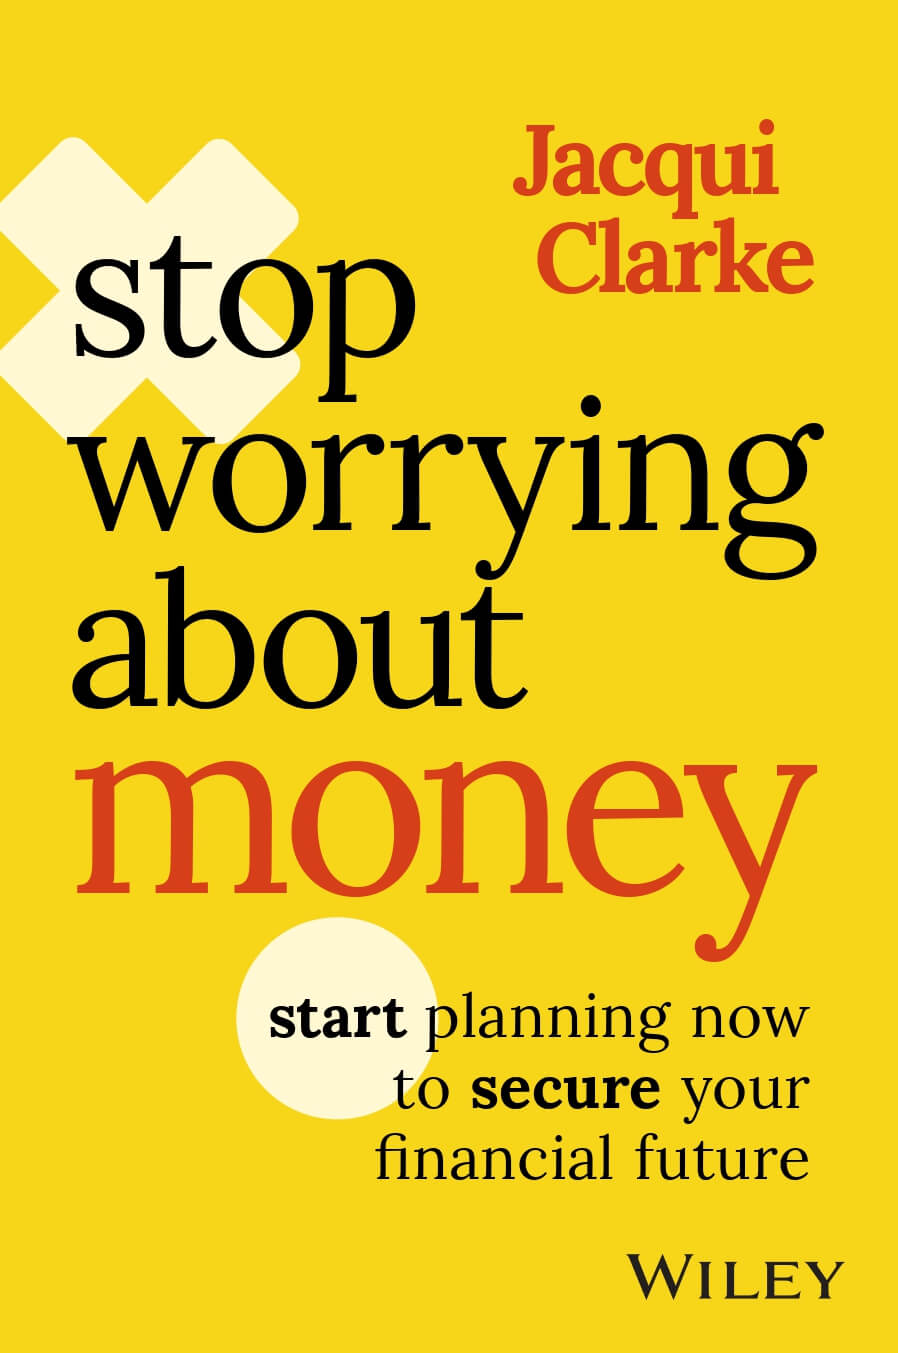 Stop Worrying About Money - 10 Ways to Prevent Business Failure